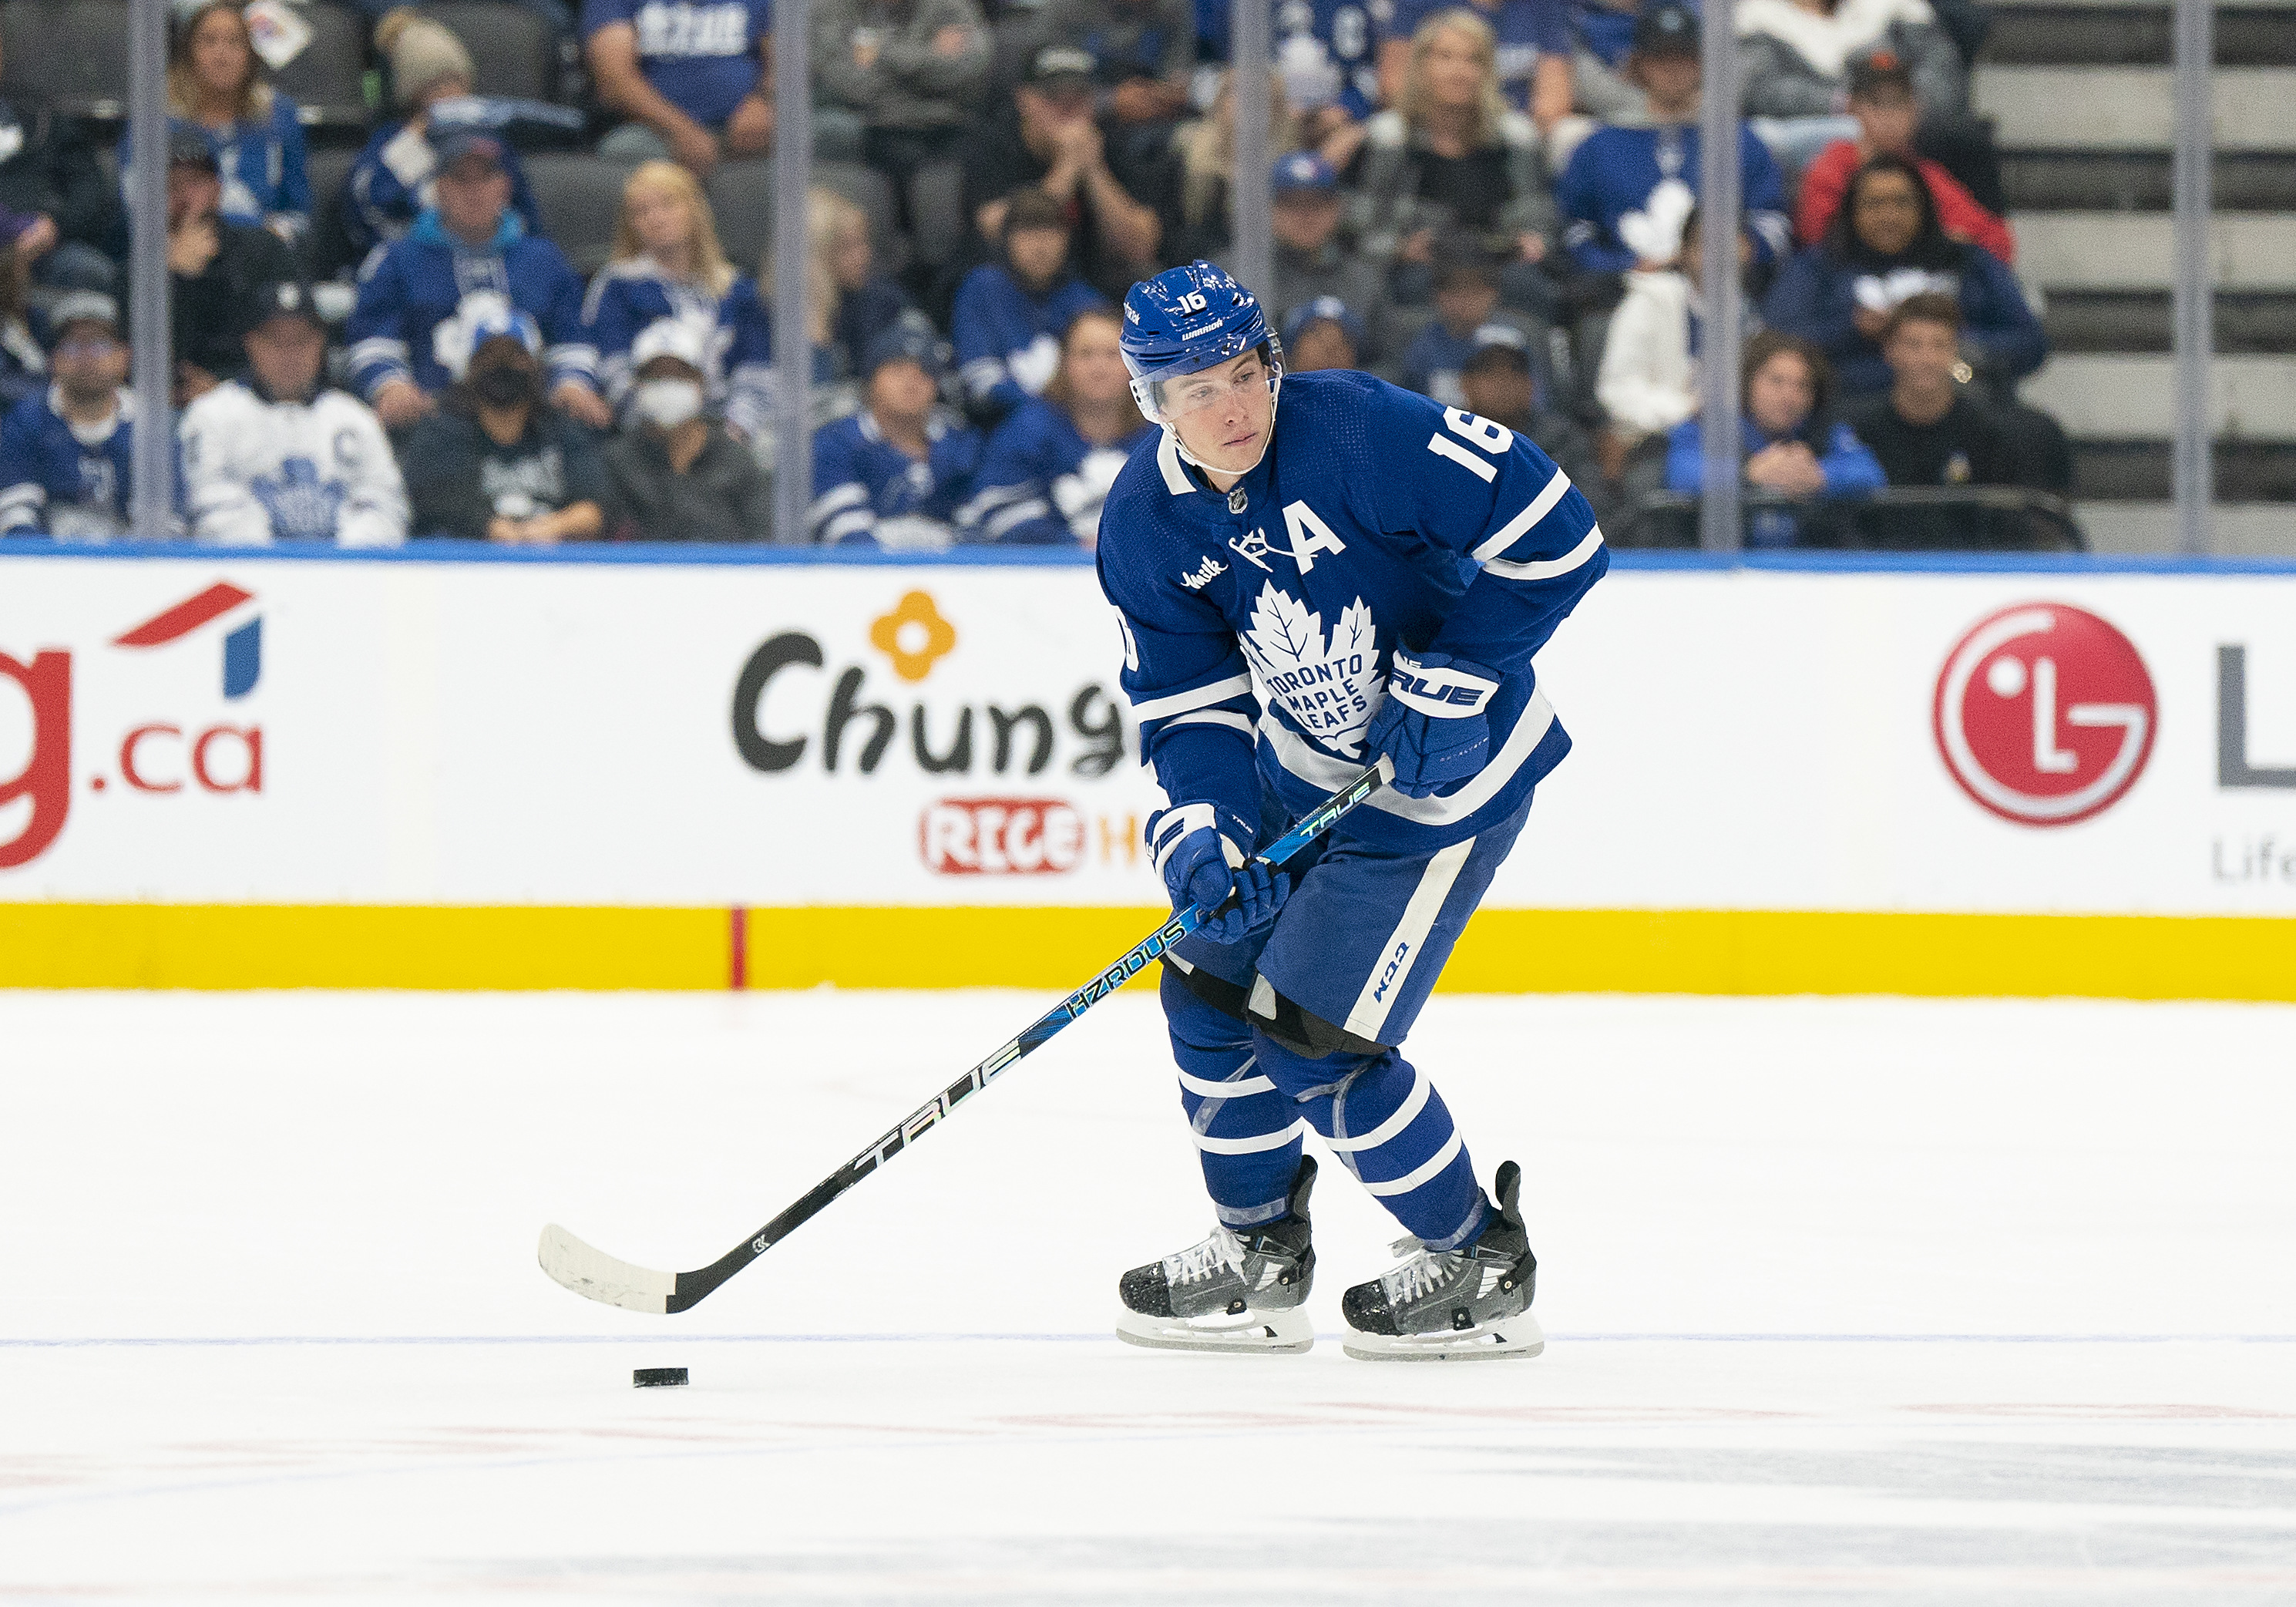 Mitch Marner silencing doubters with career-best season